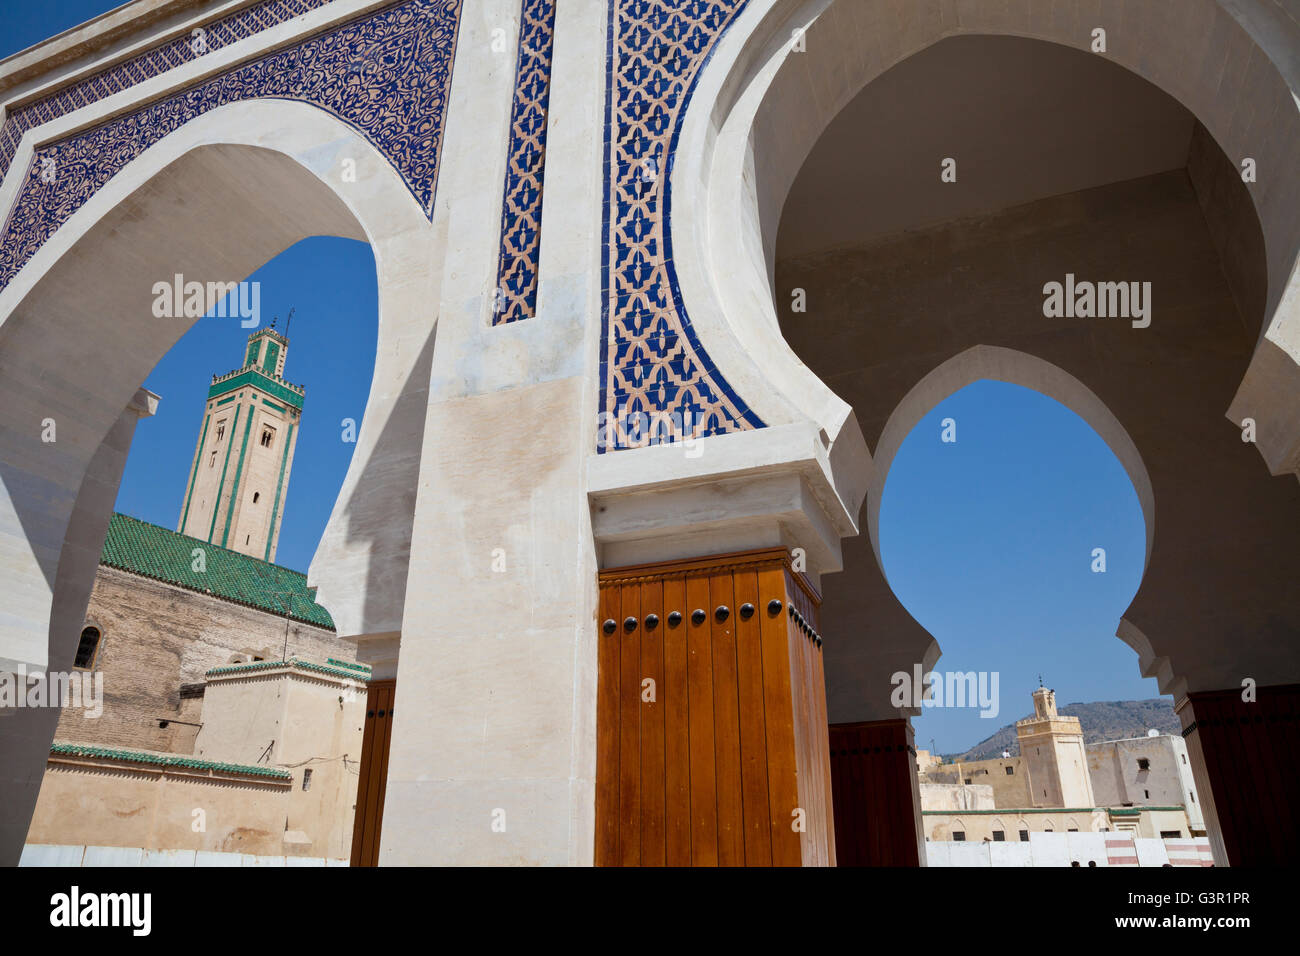 Mosque and city gate in Fez ( Fes Fas ) city, UNESCO heritage site in Morocco, Africa Stock Photo